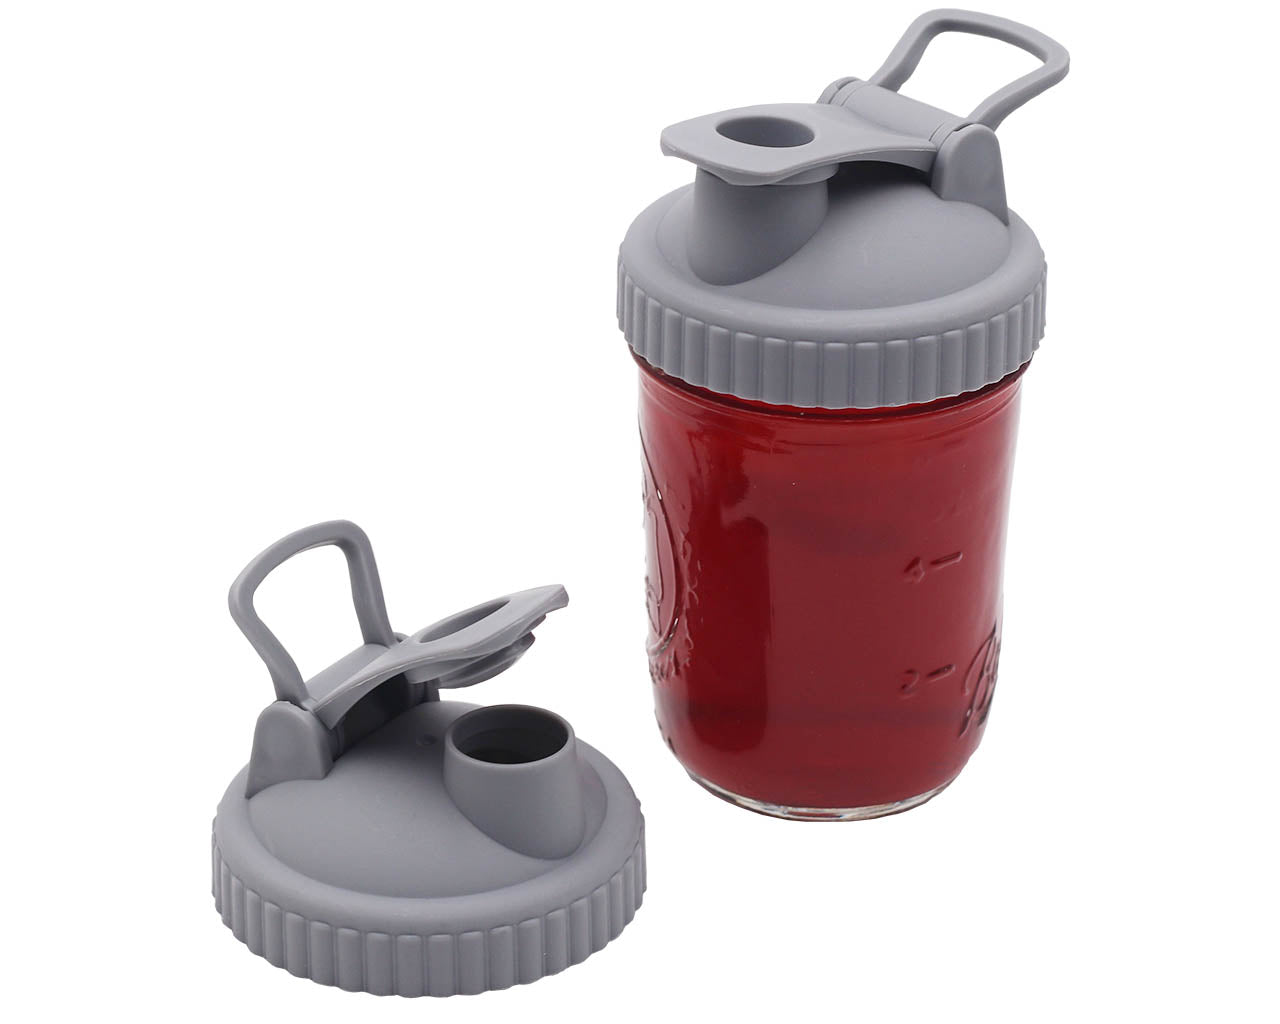 Pour & Store Lid with Carry Loop for Mason Jars